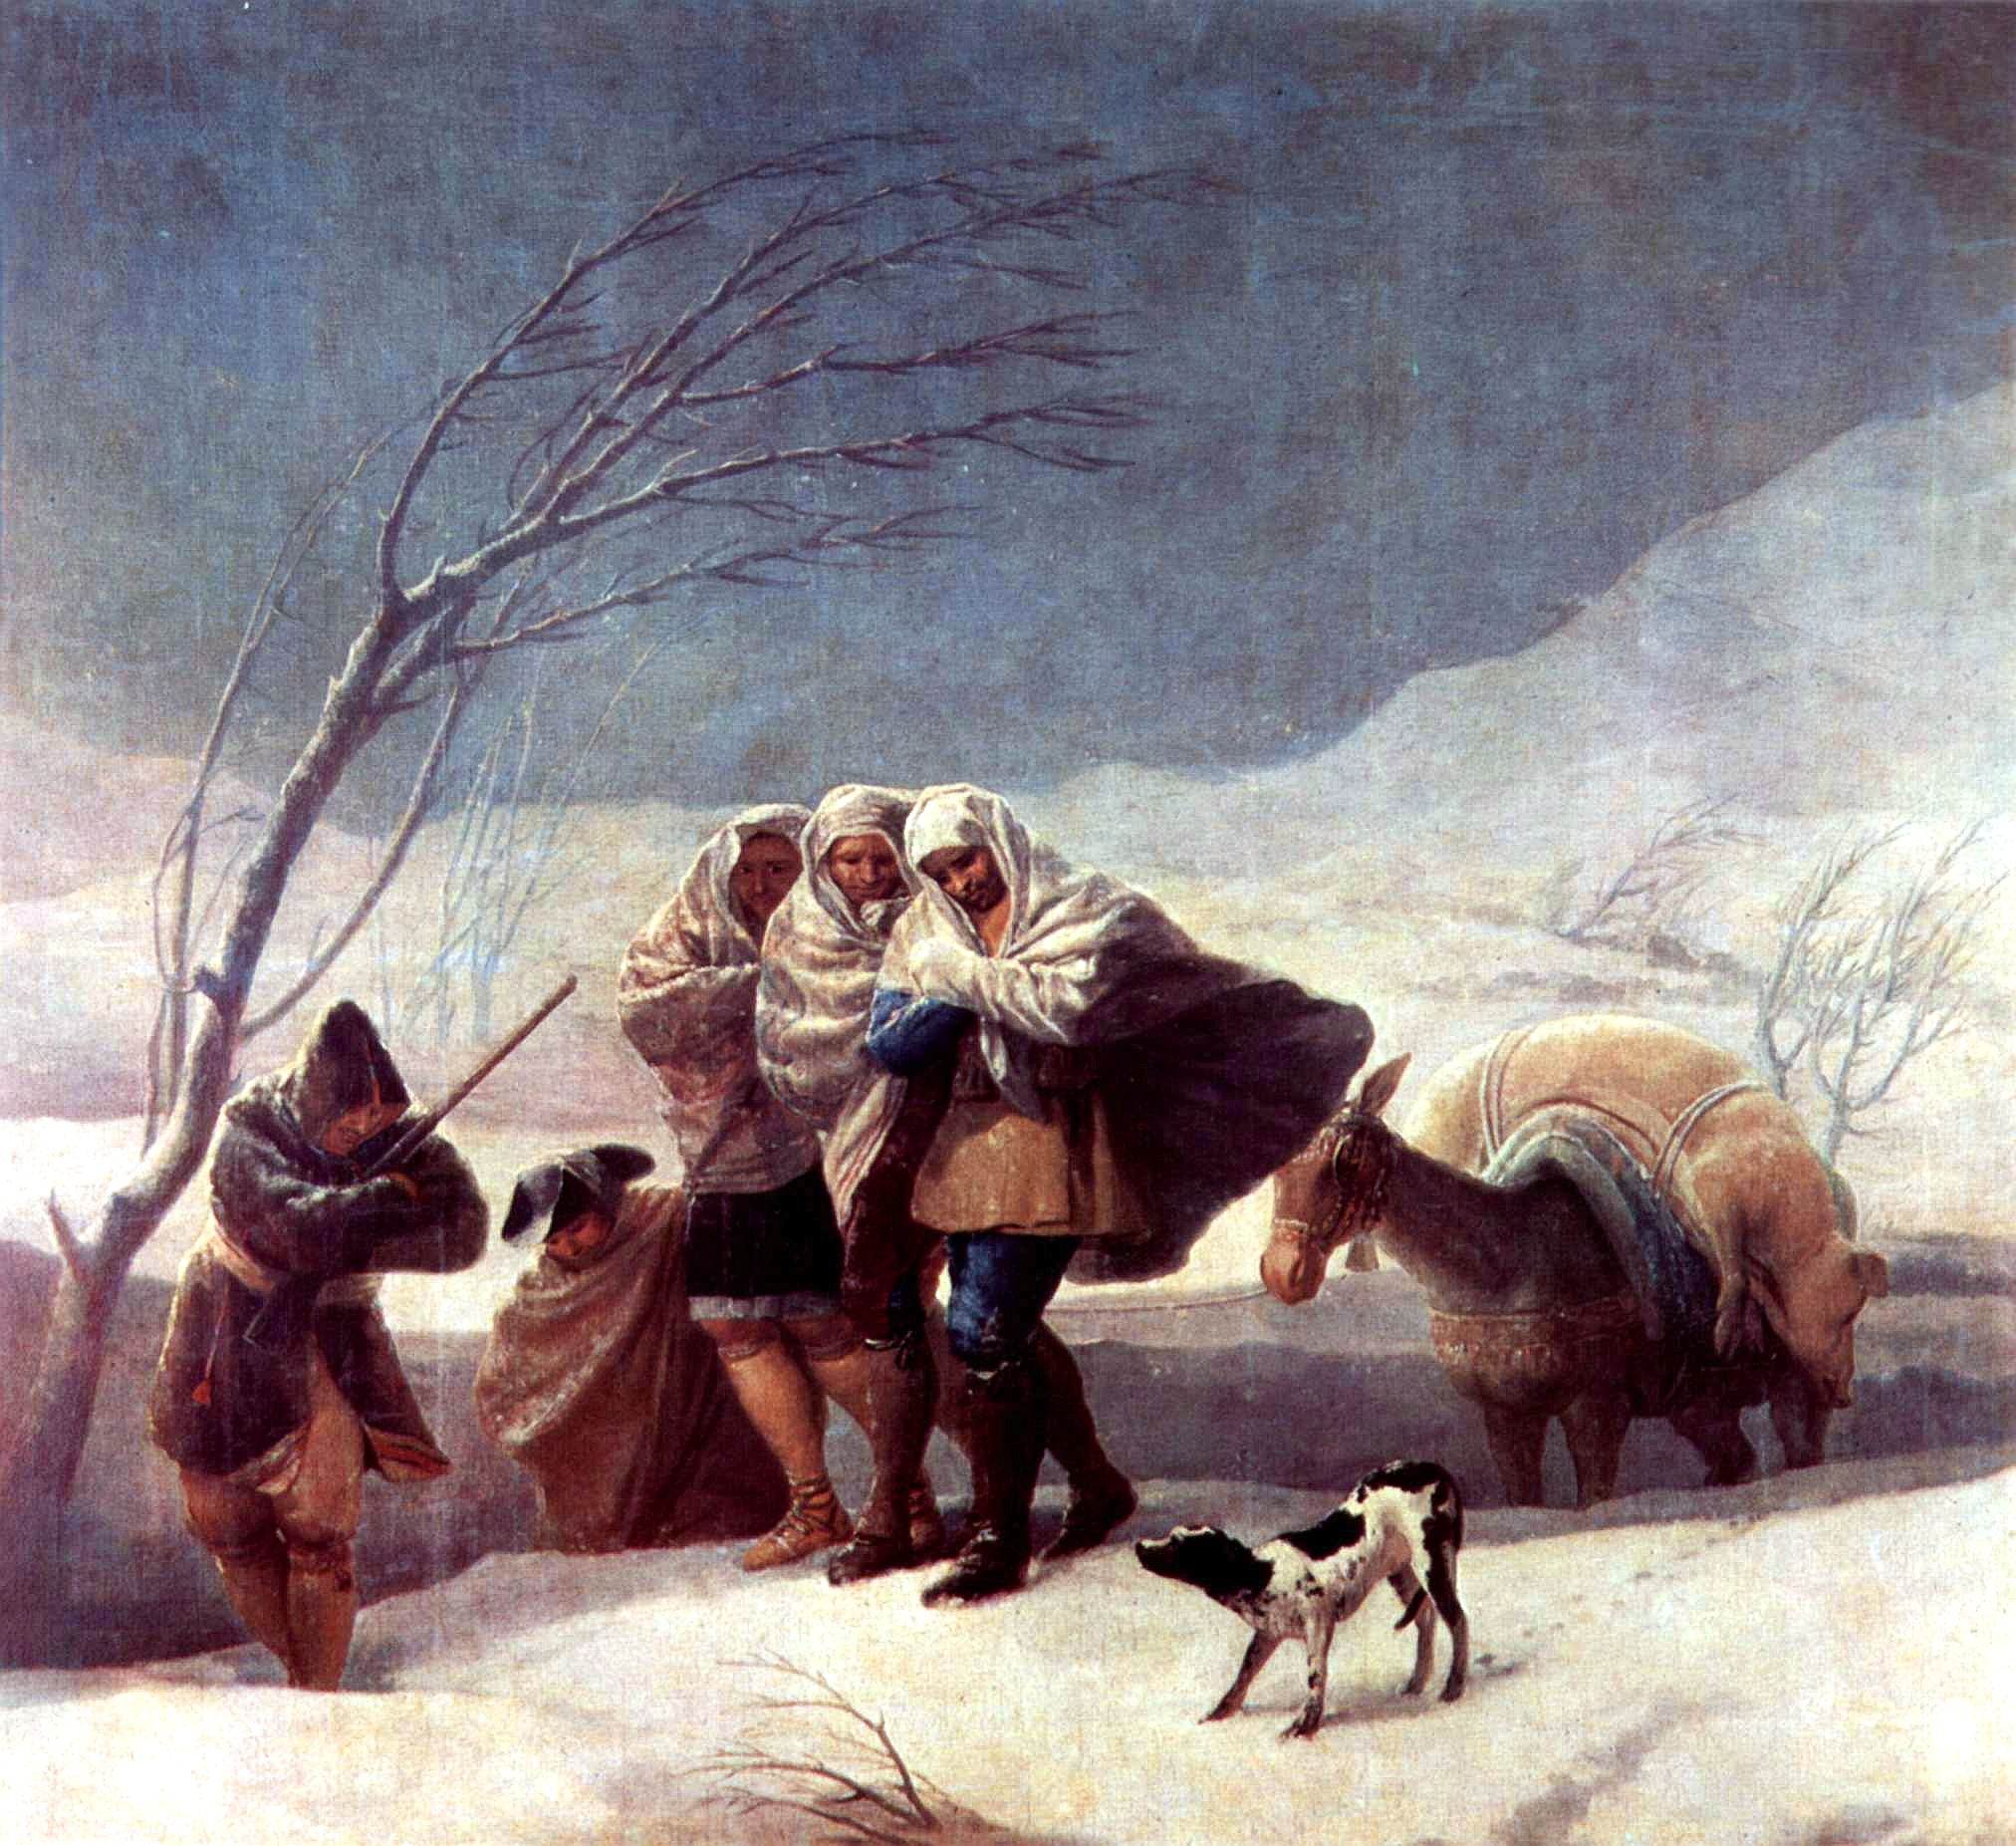 The Snowstorm (Winter) (1787).